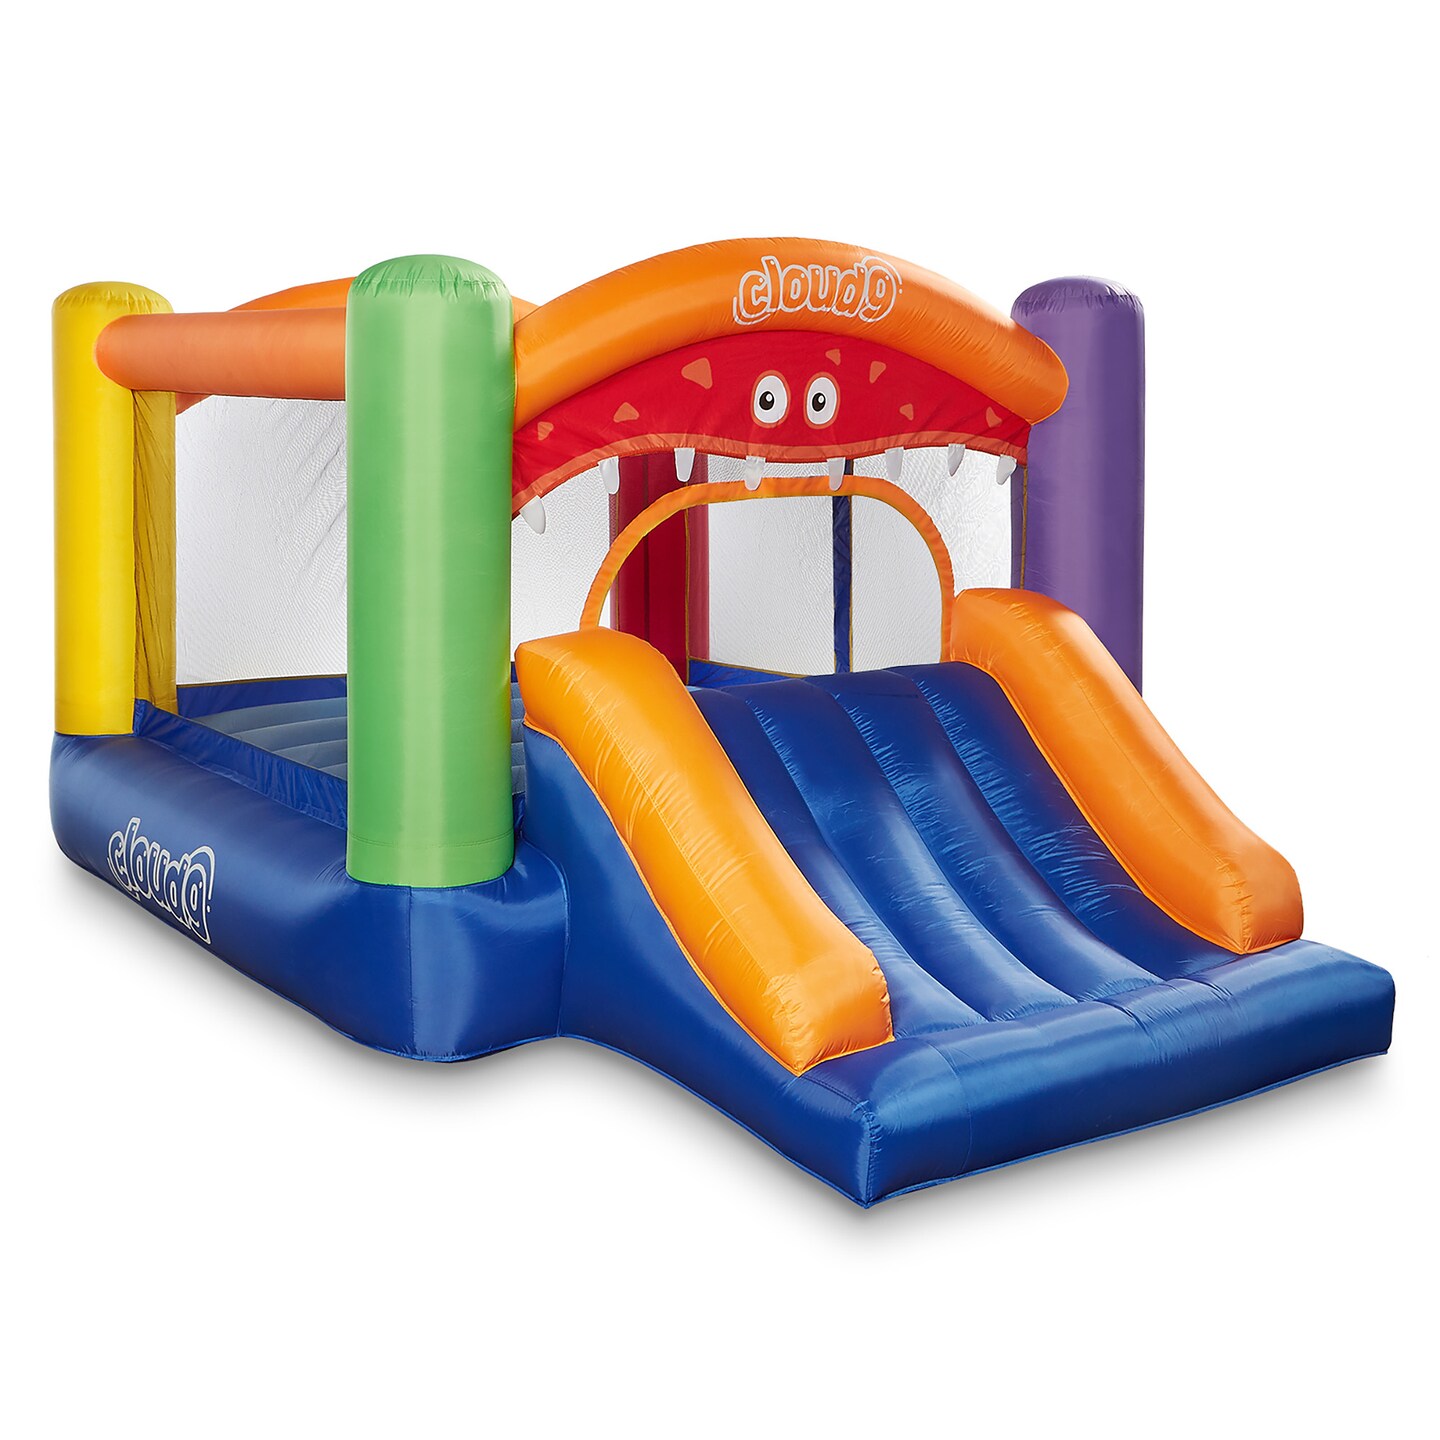 Cloud 9 Inflatable Bounce House and Blower, Monster Theme Bouncer for Kids with Slide, Includes Stakes and Repair Patches